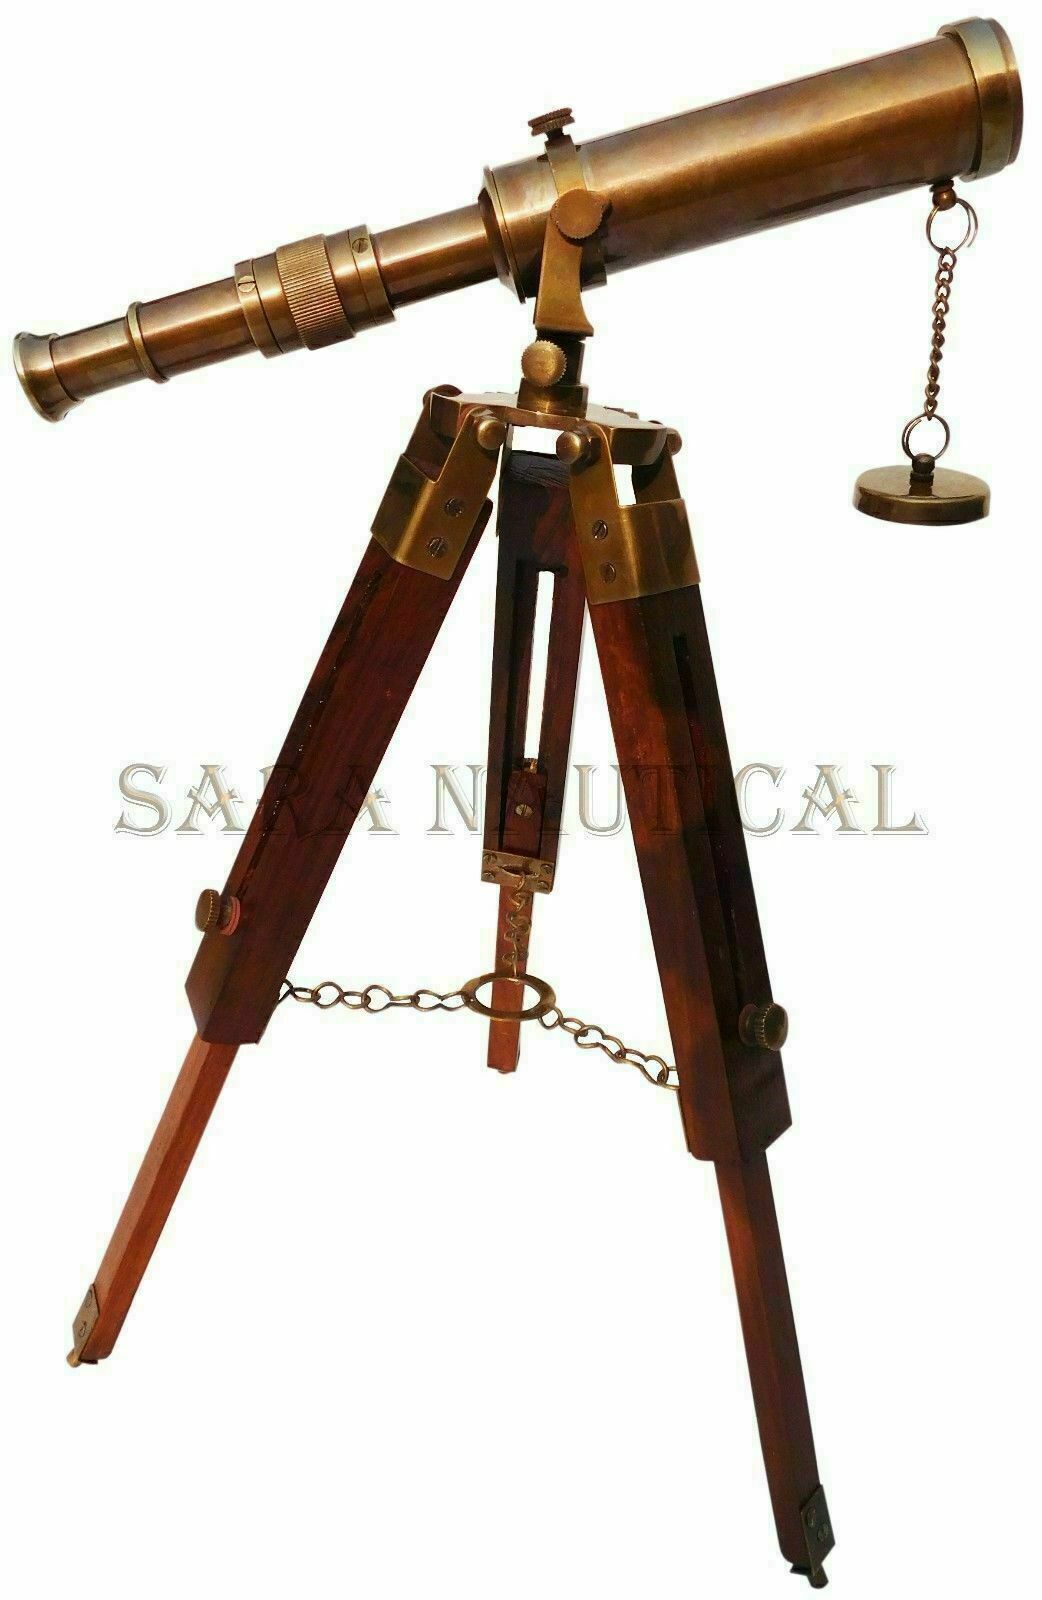 Antique Brass Telescope Spy Collectible Complete Free Shipping Tripod Vint Wooden Stand Boston Mall